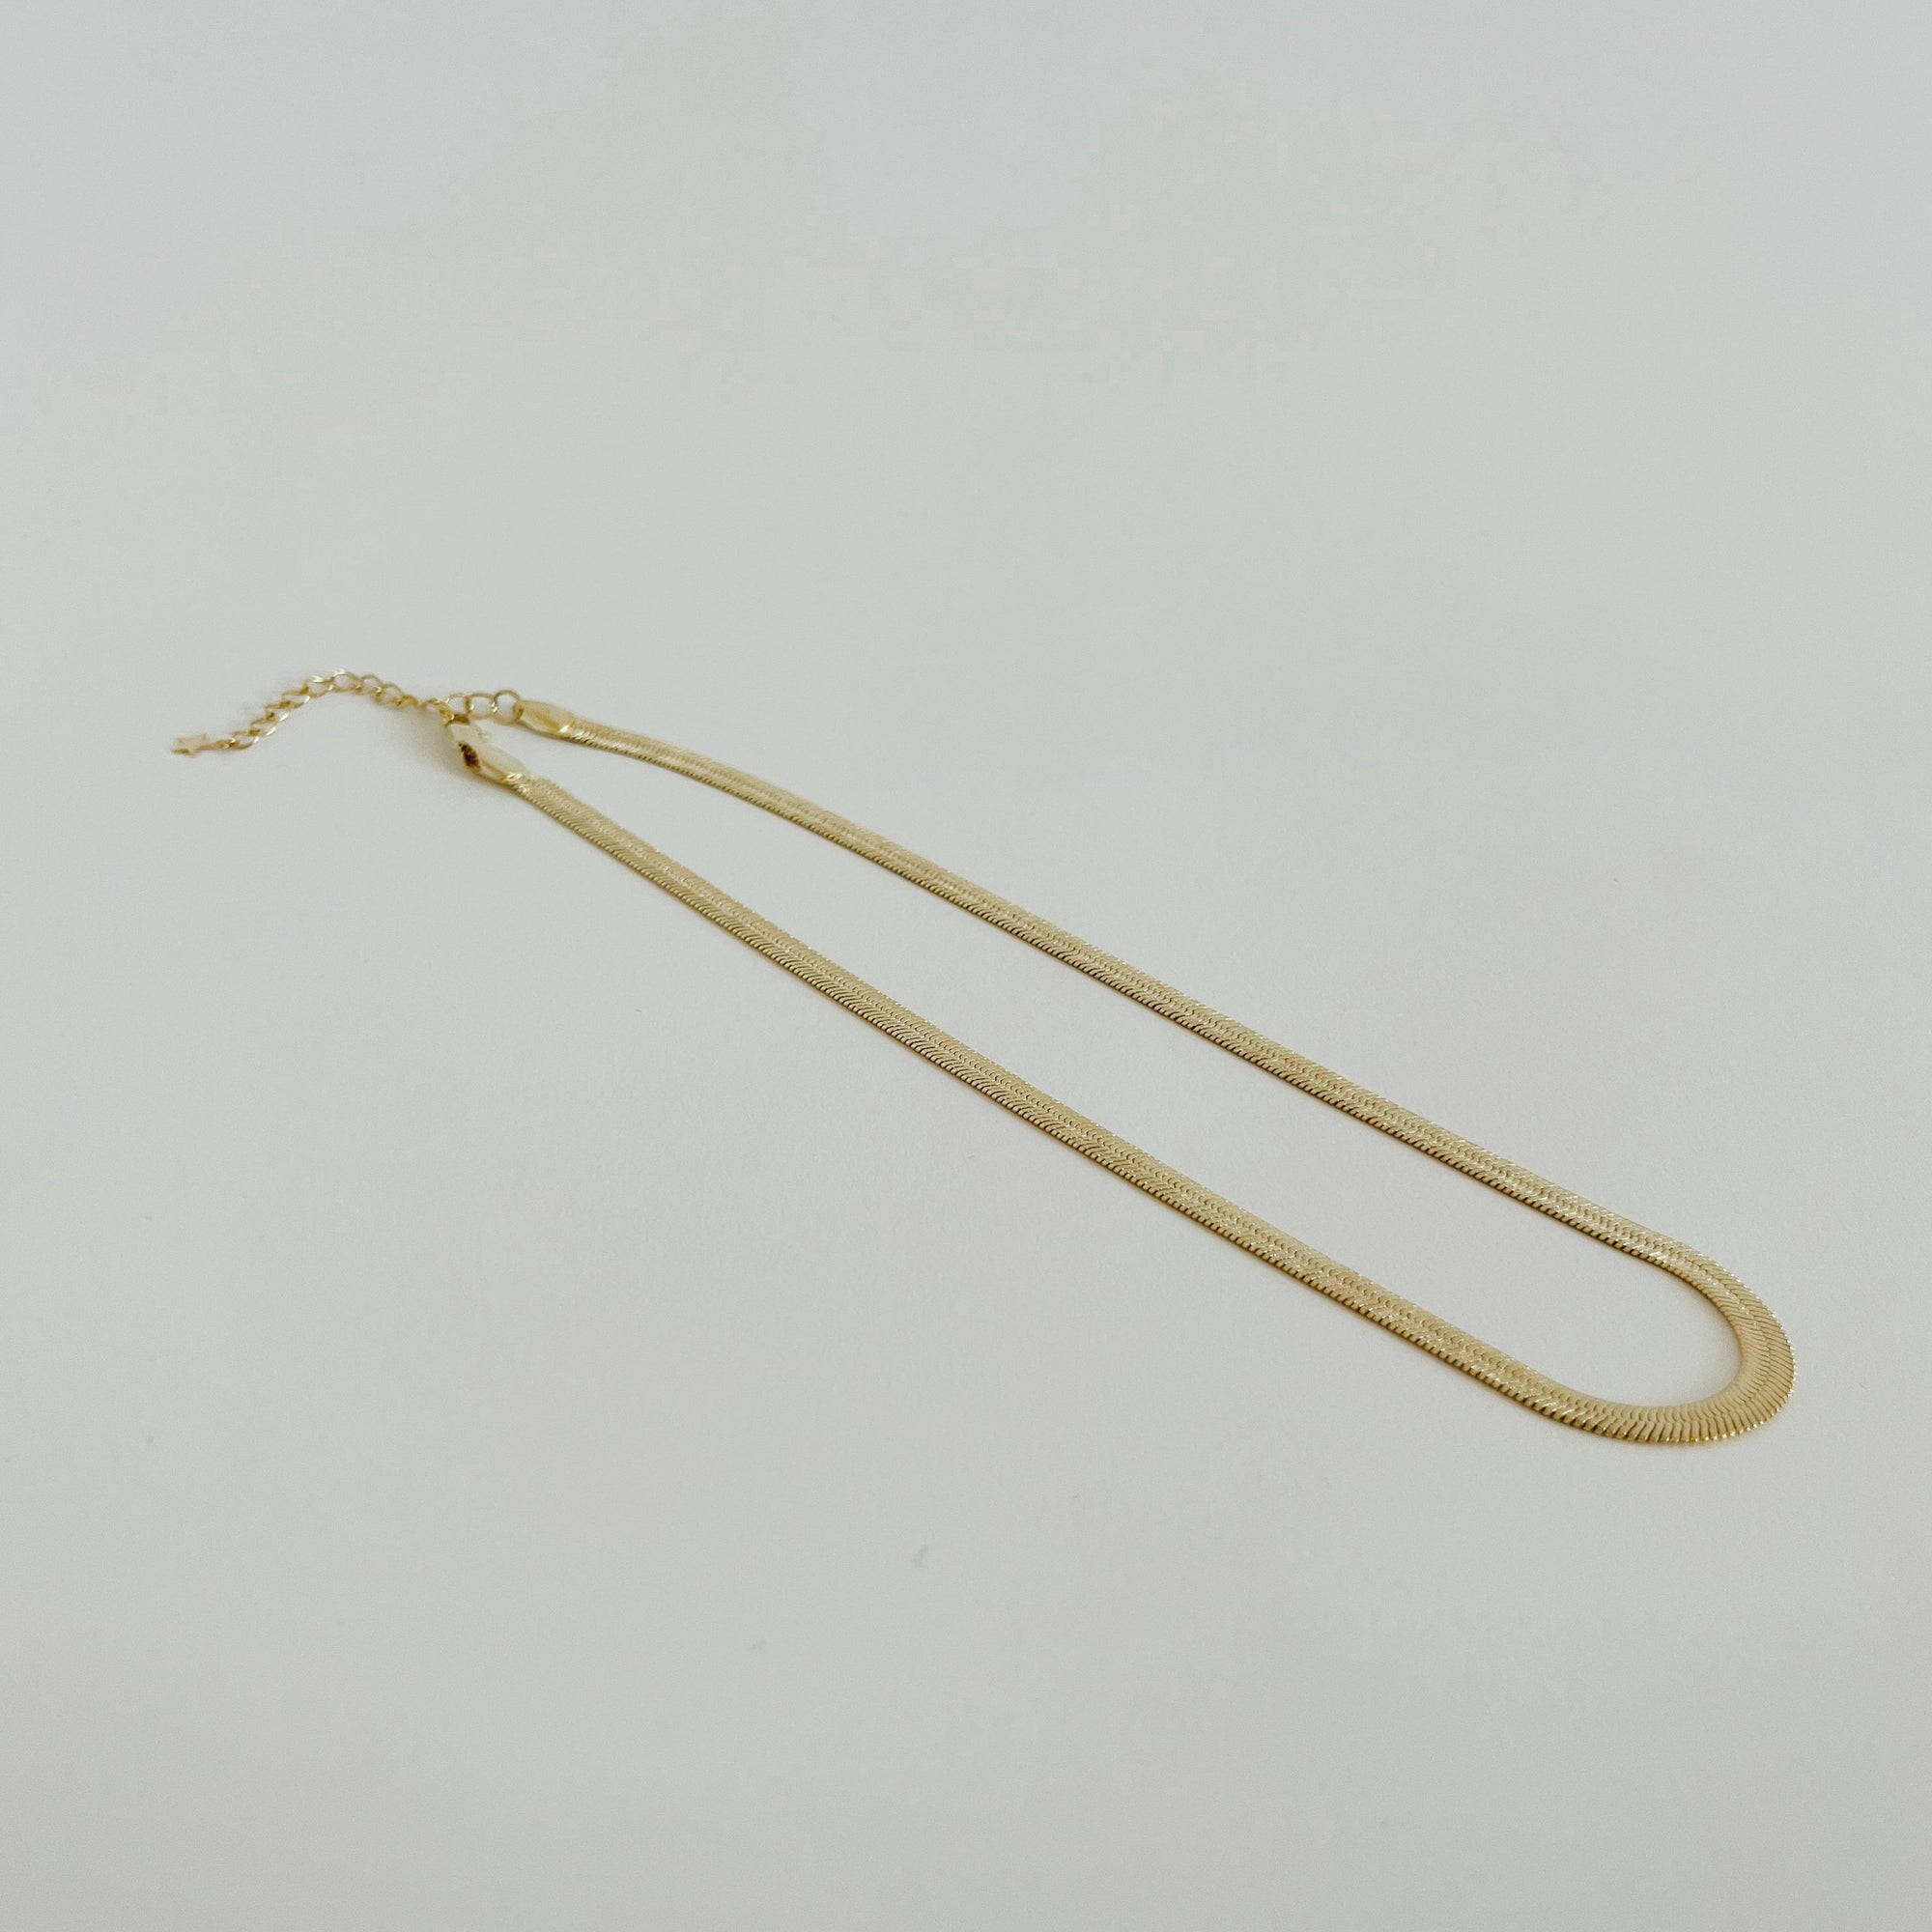 Gold snake chain necklace on white background.